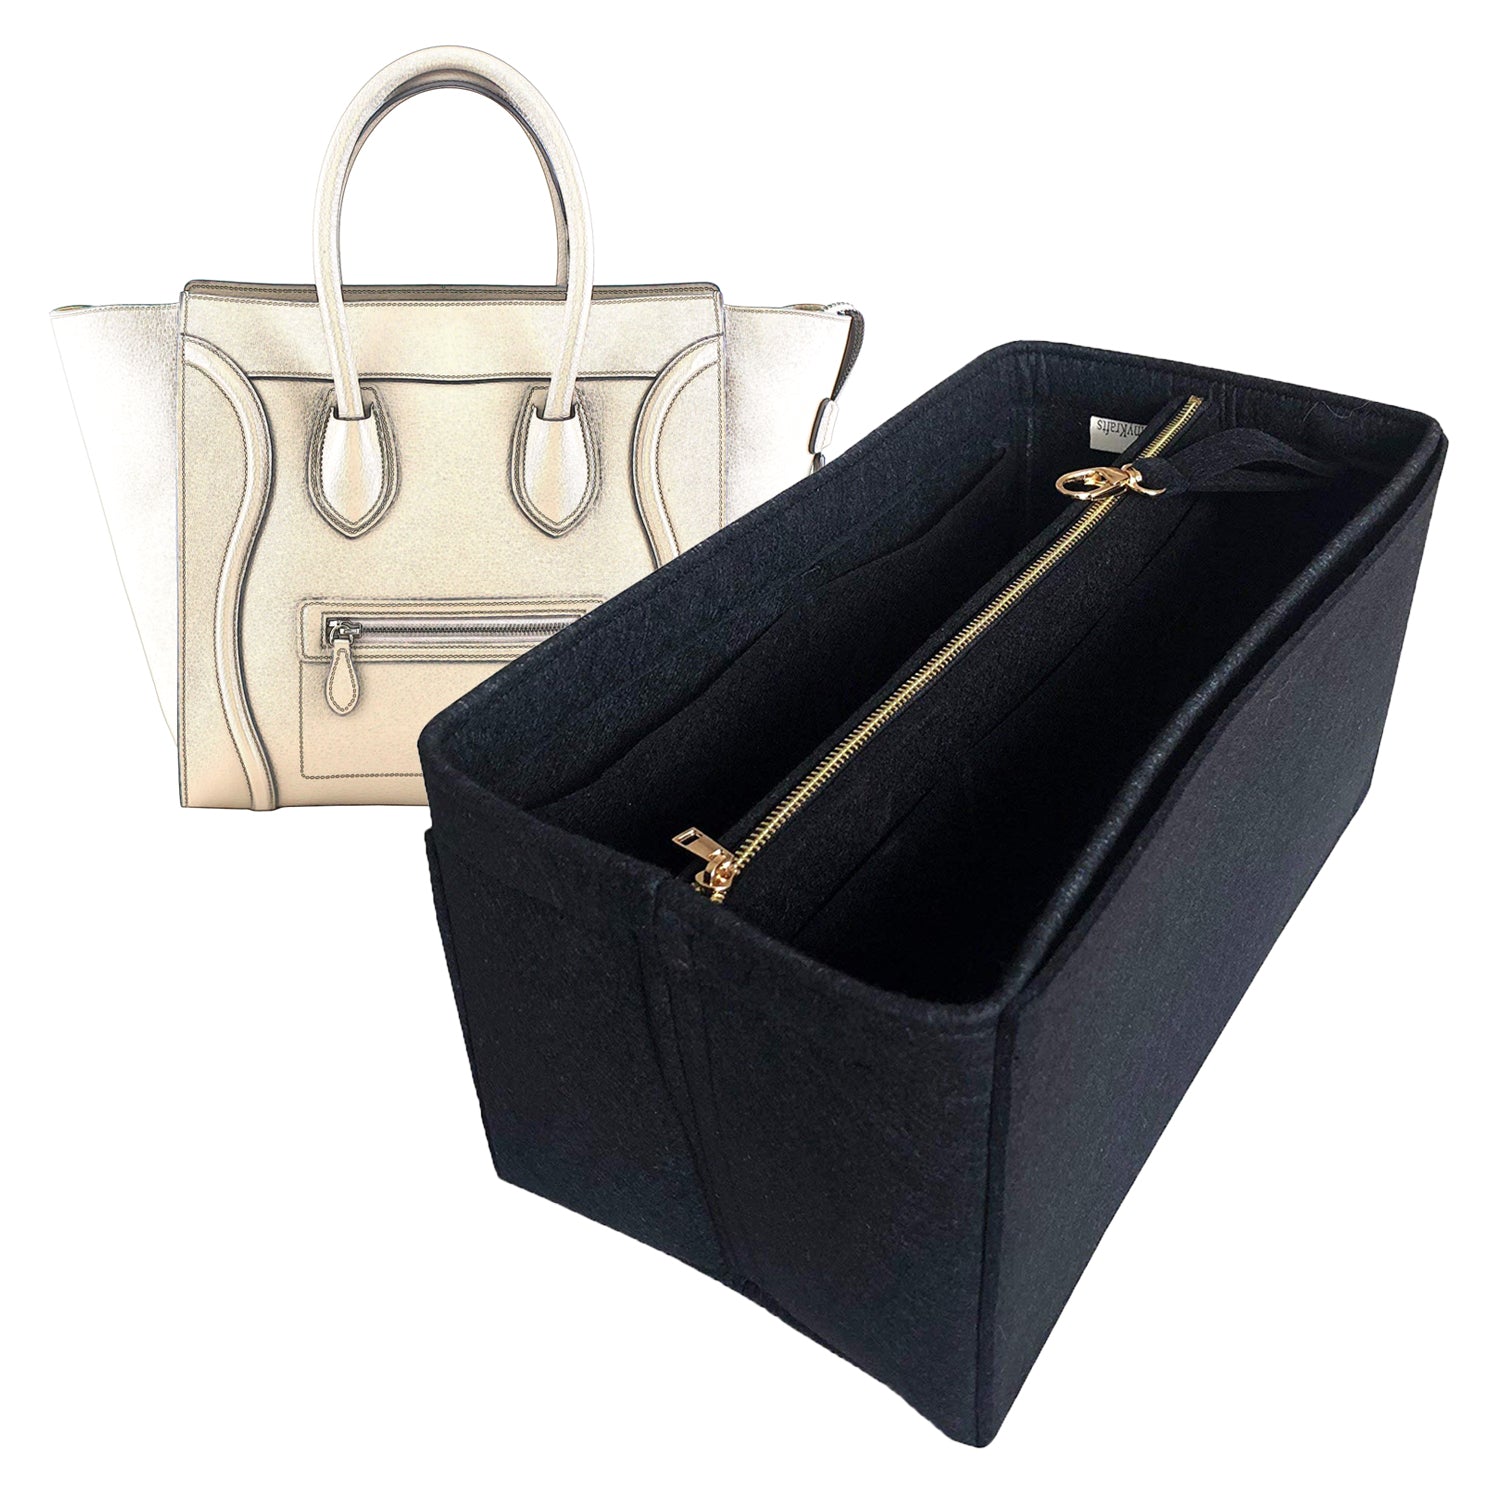 Purse Organizer for Celine Micro Luggage Bag with Single Bottle Holder